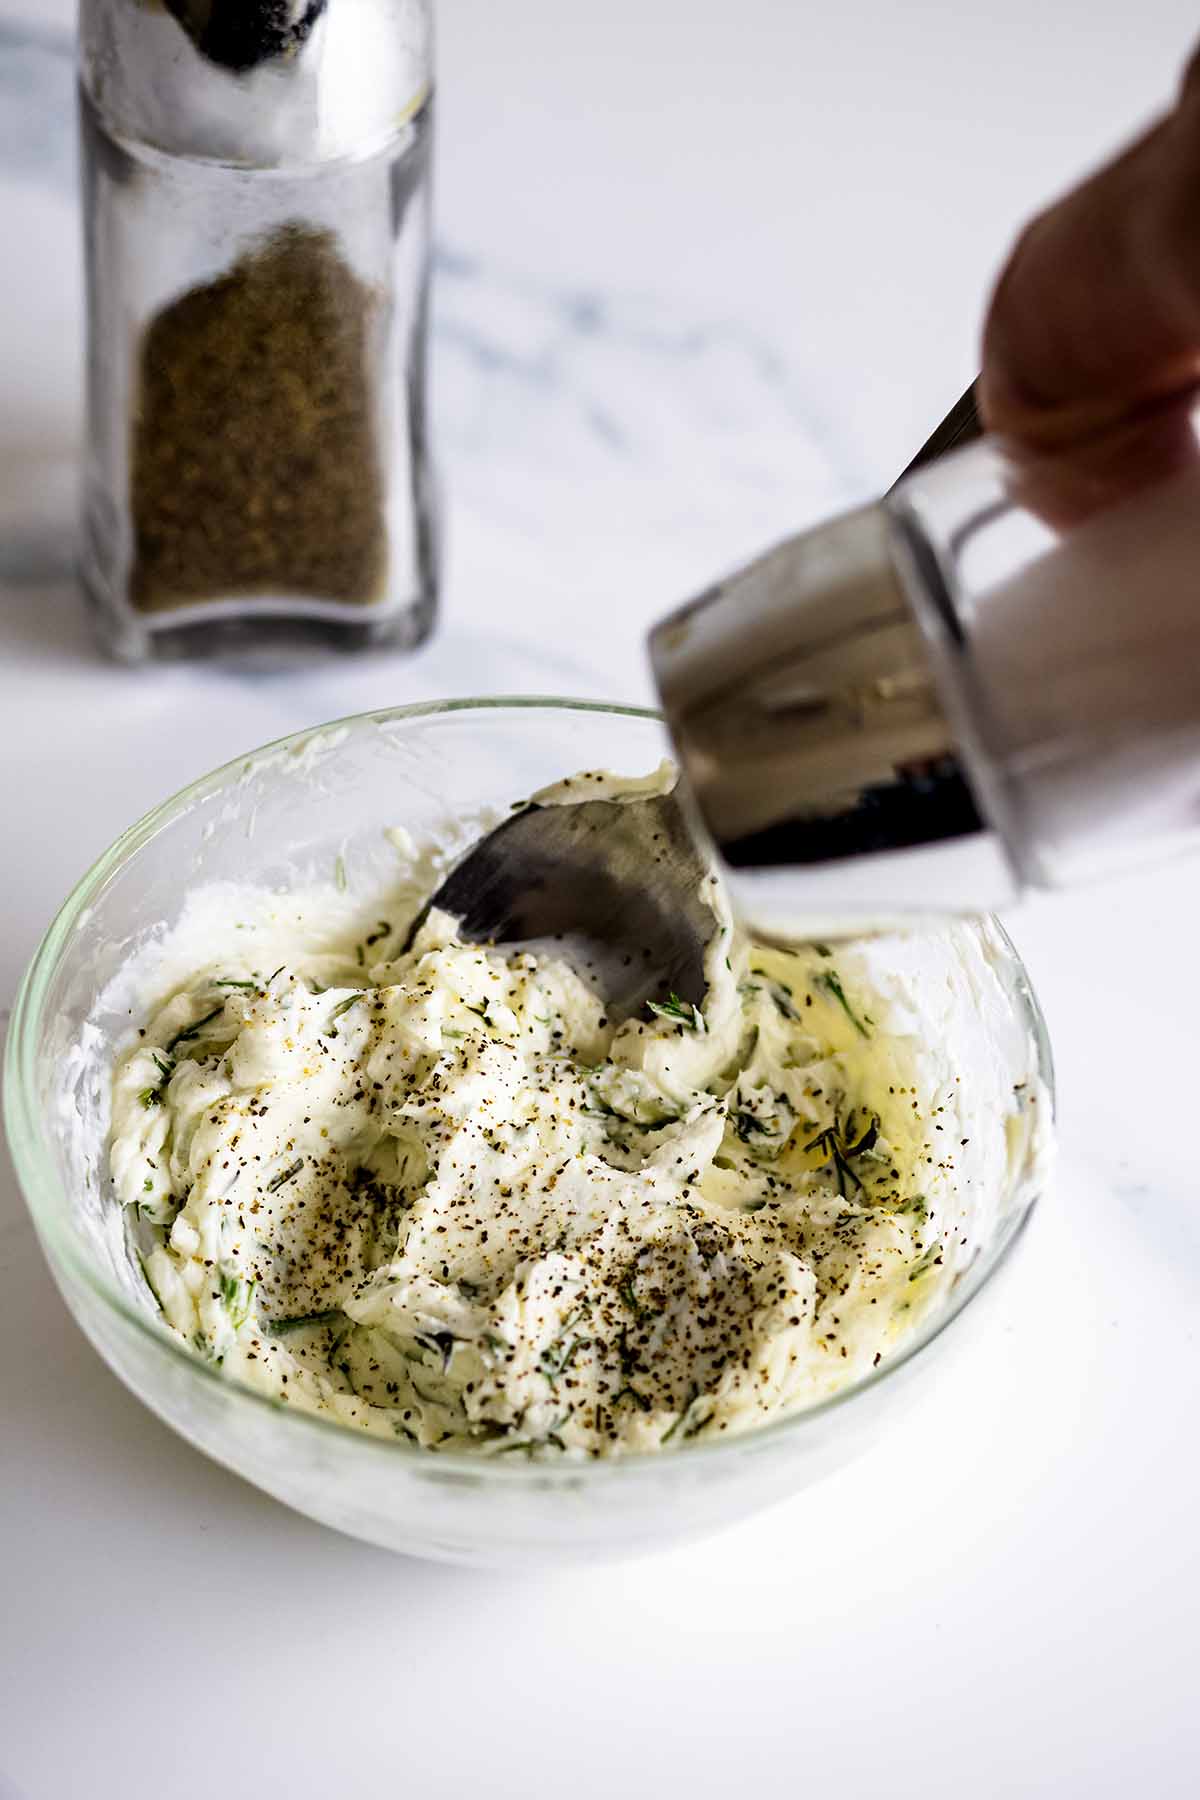 Adding salt to a bowl of herbed cream cheese